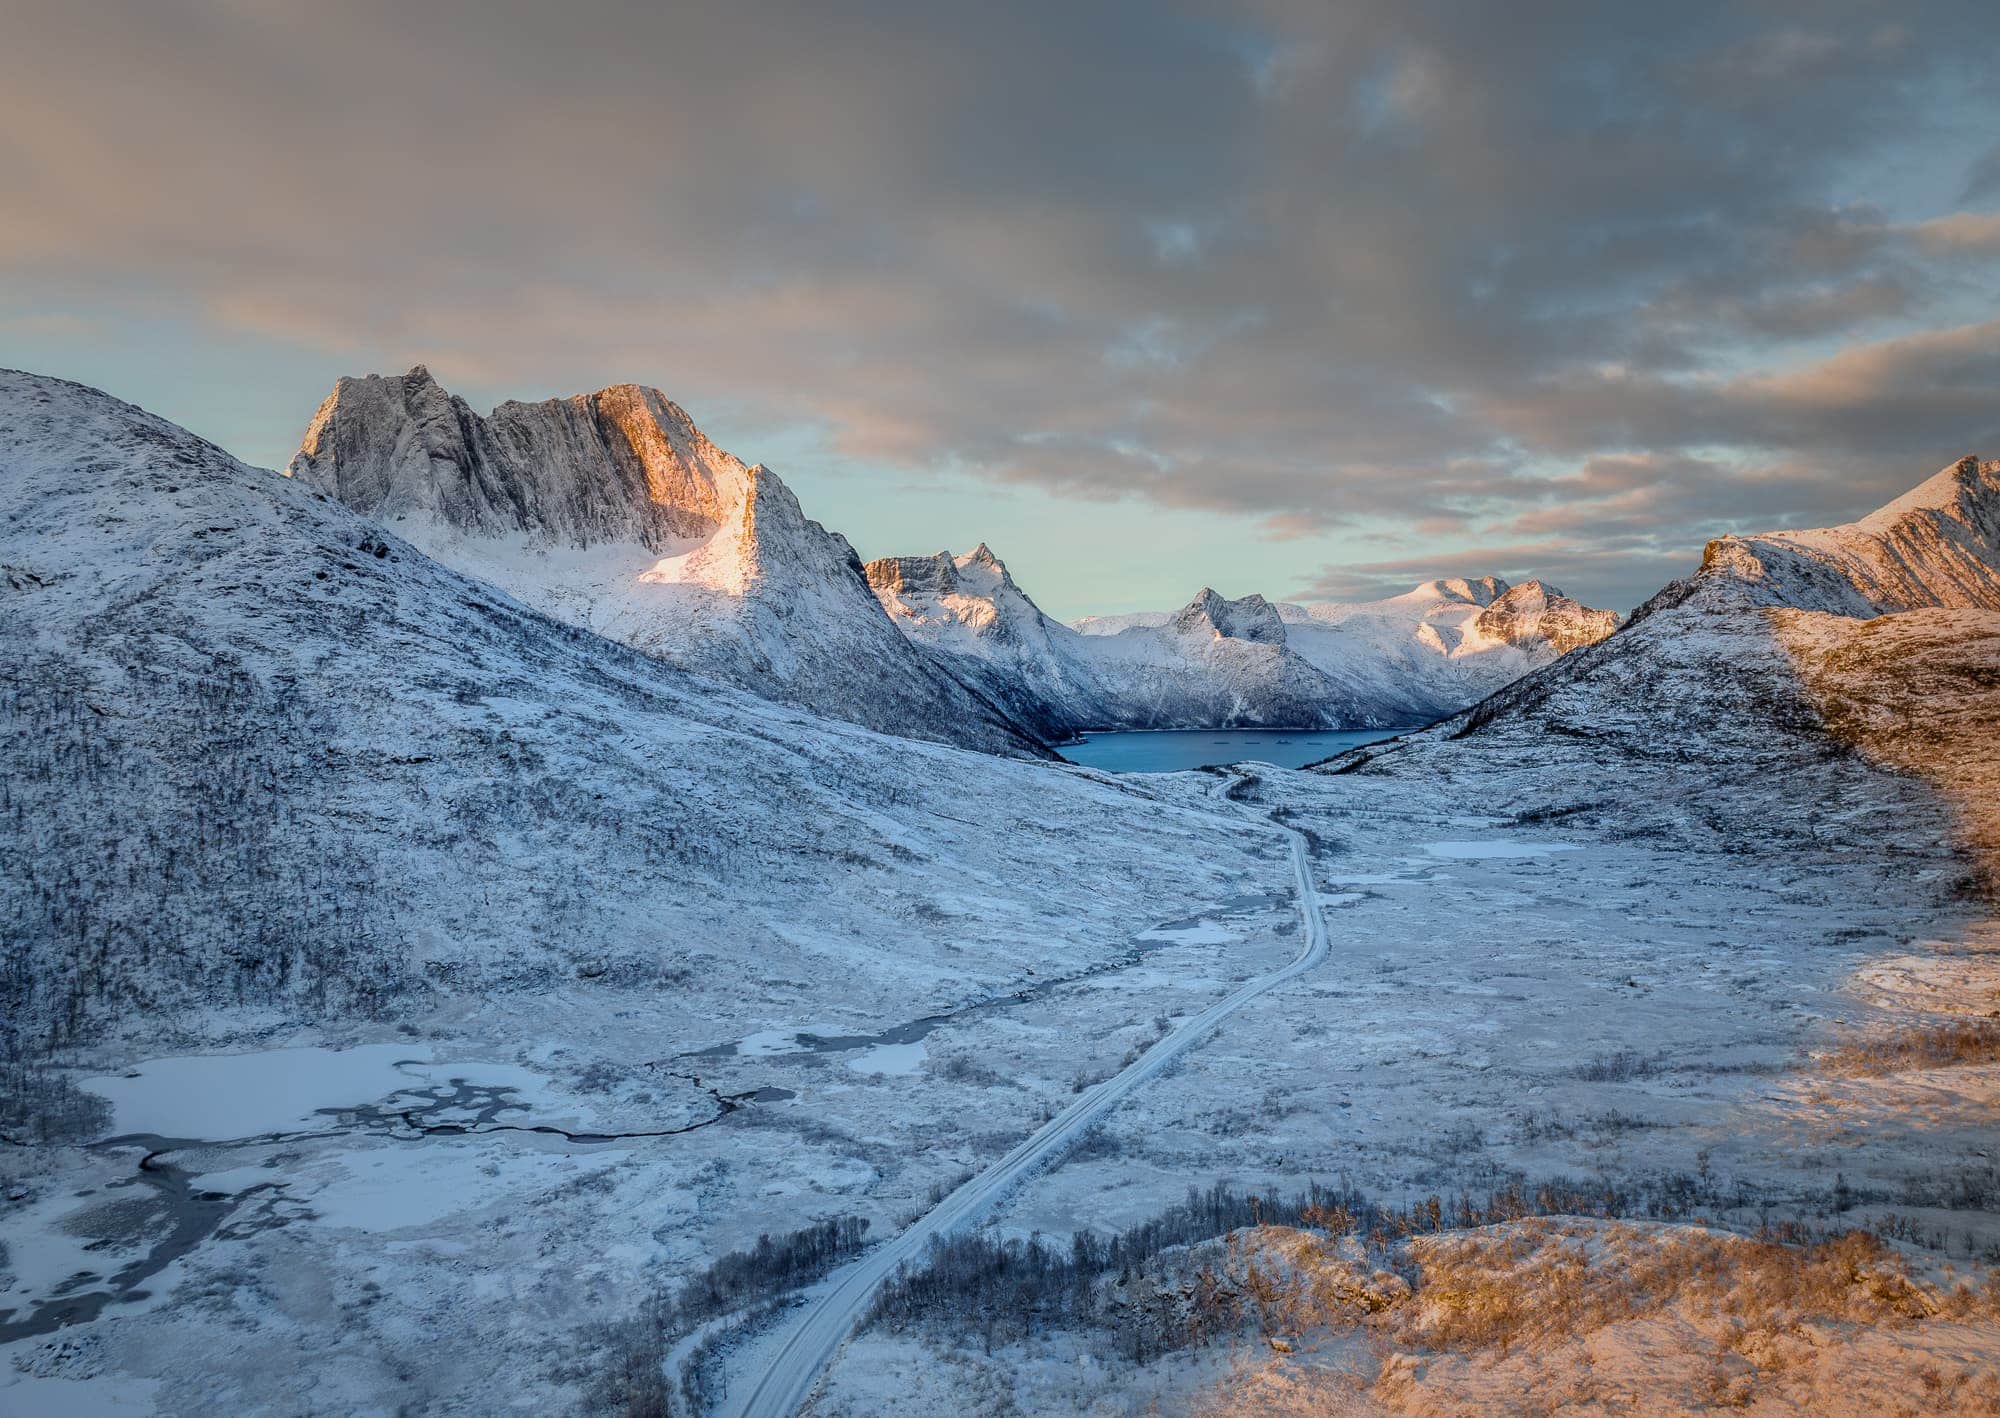 Snow-covered landscape at Husøy, Senja, with mountains glowing in the soft light of the setting sun and a road winding through the valley.